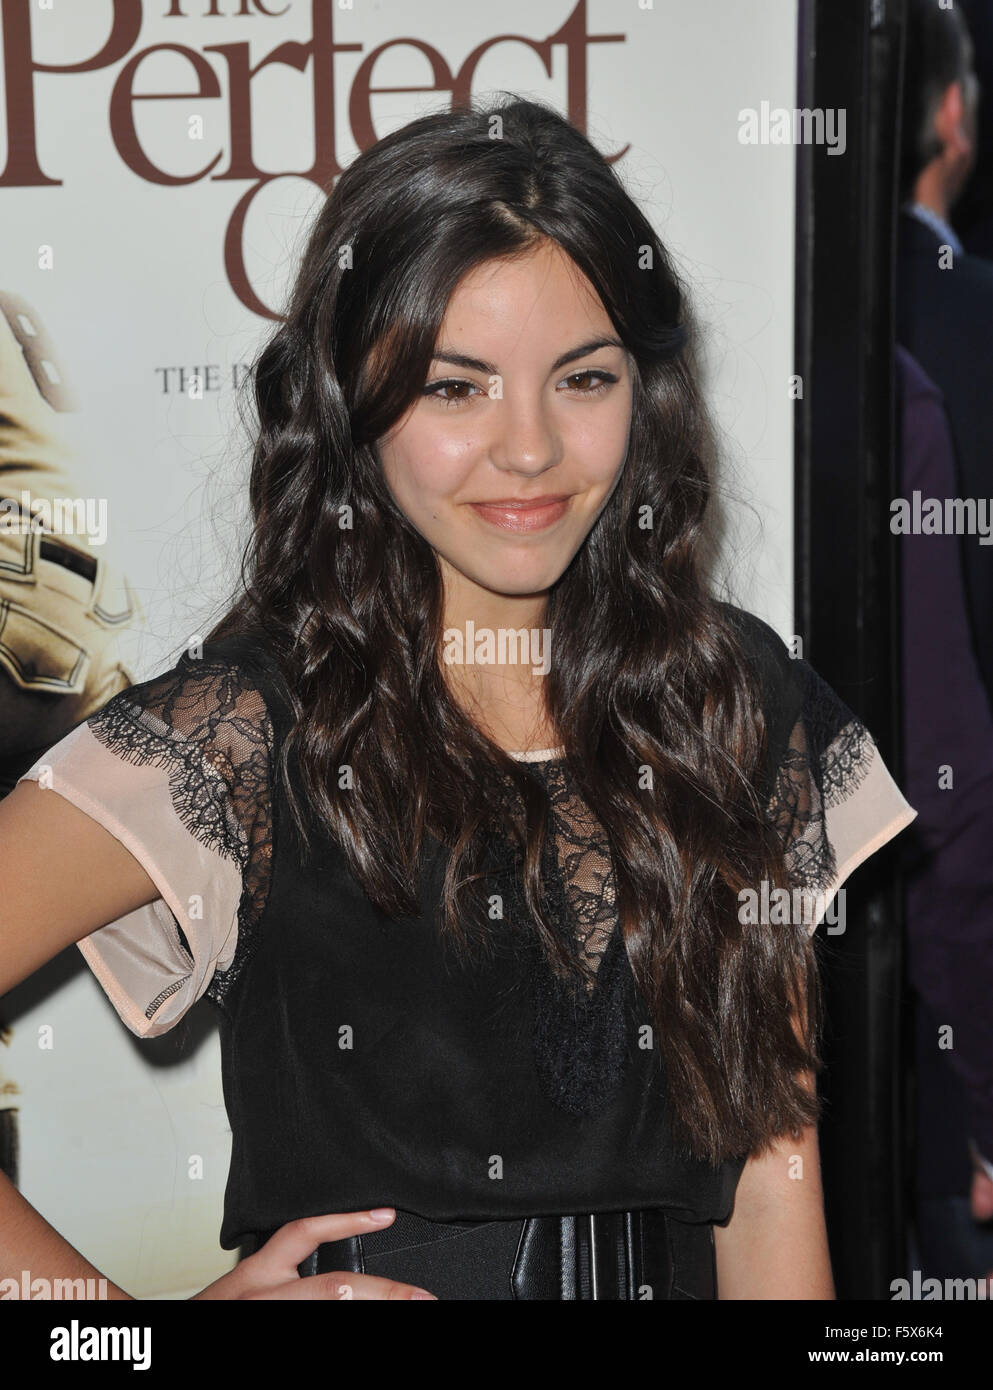 LOS ANGELES, CA - APRIL 5, 2010: Samantha Boscarino at the premiere of 'The Perfect Game' at The Grove, Los Angeles. Stock Photo